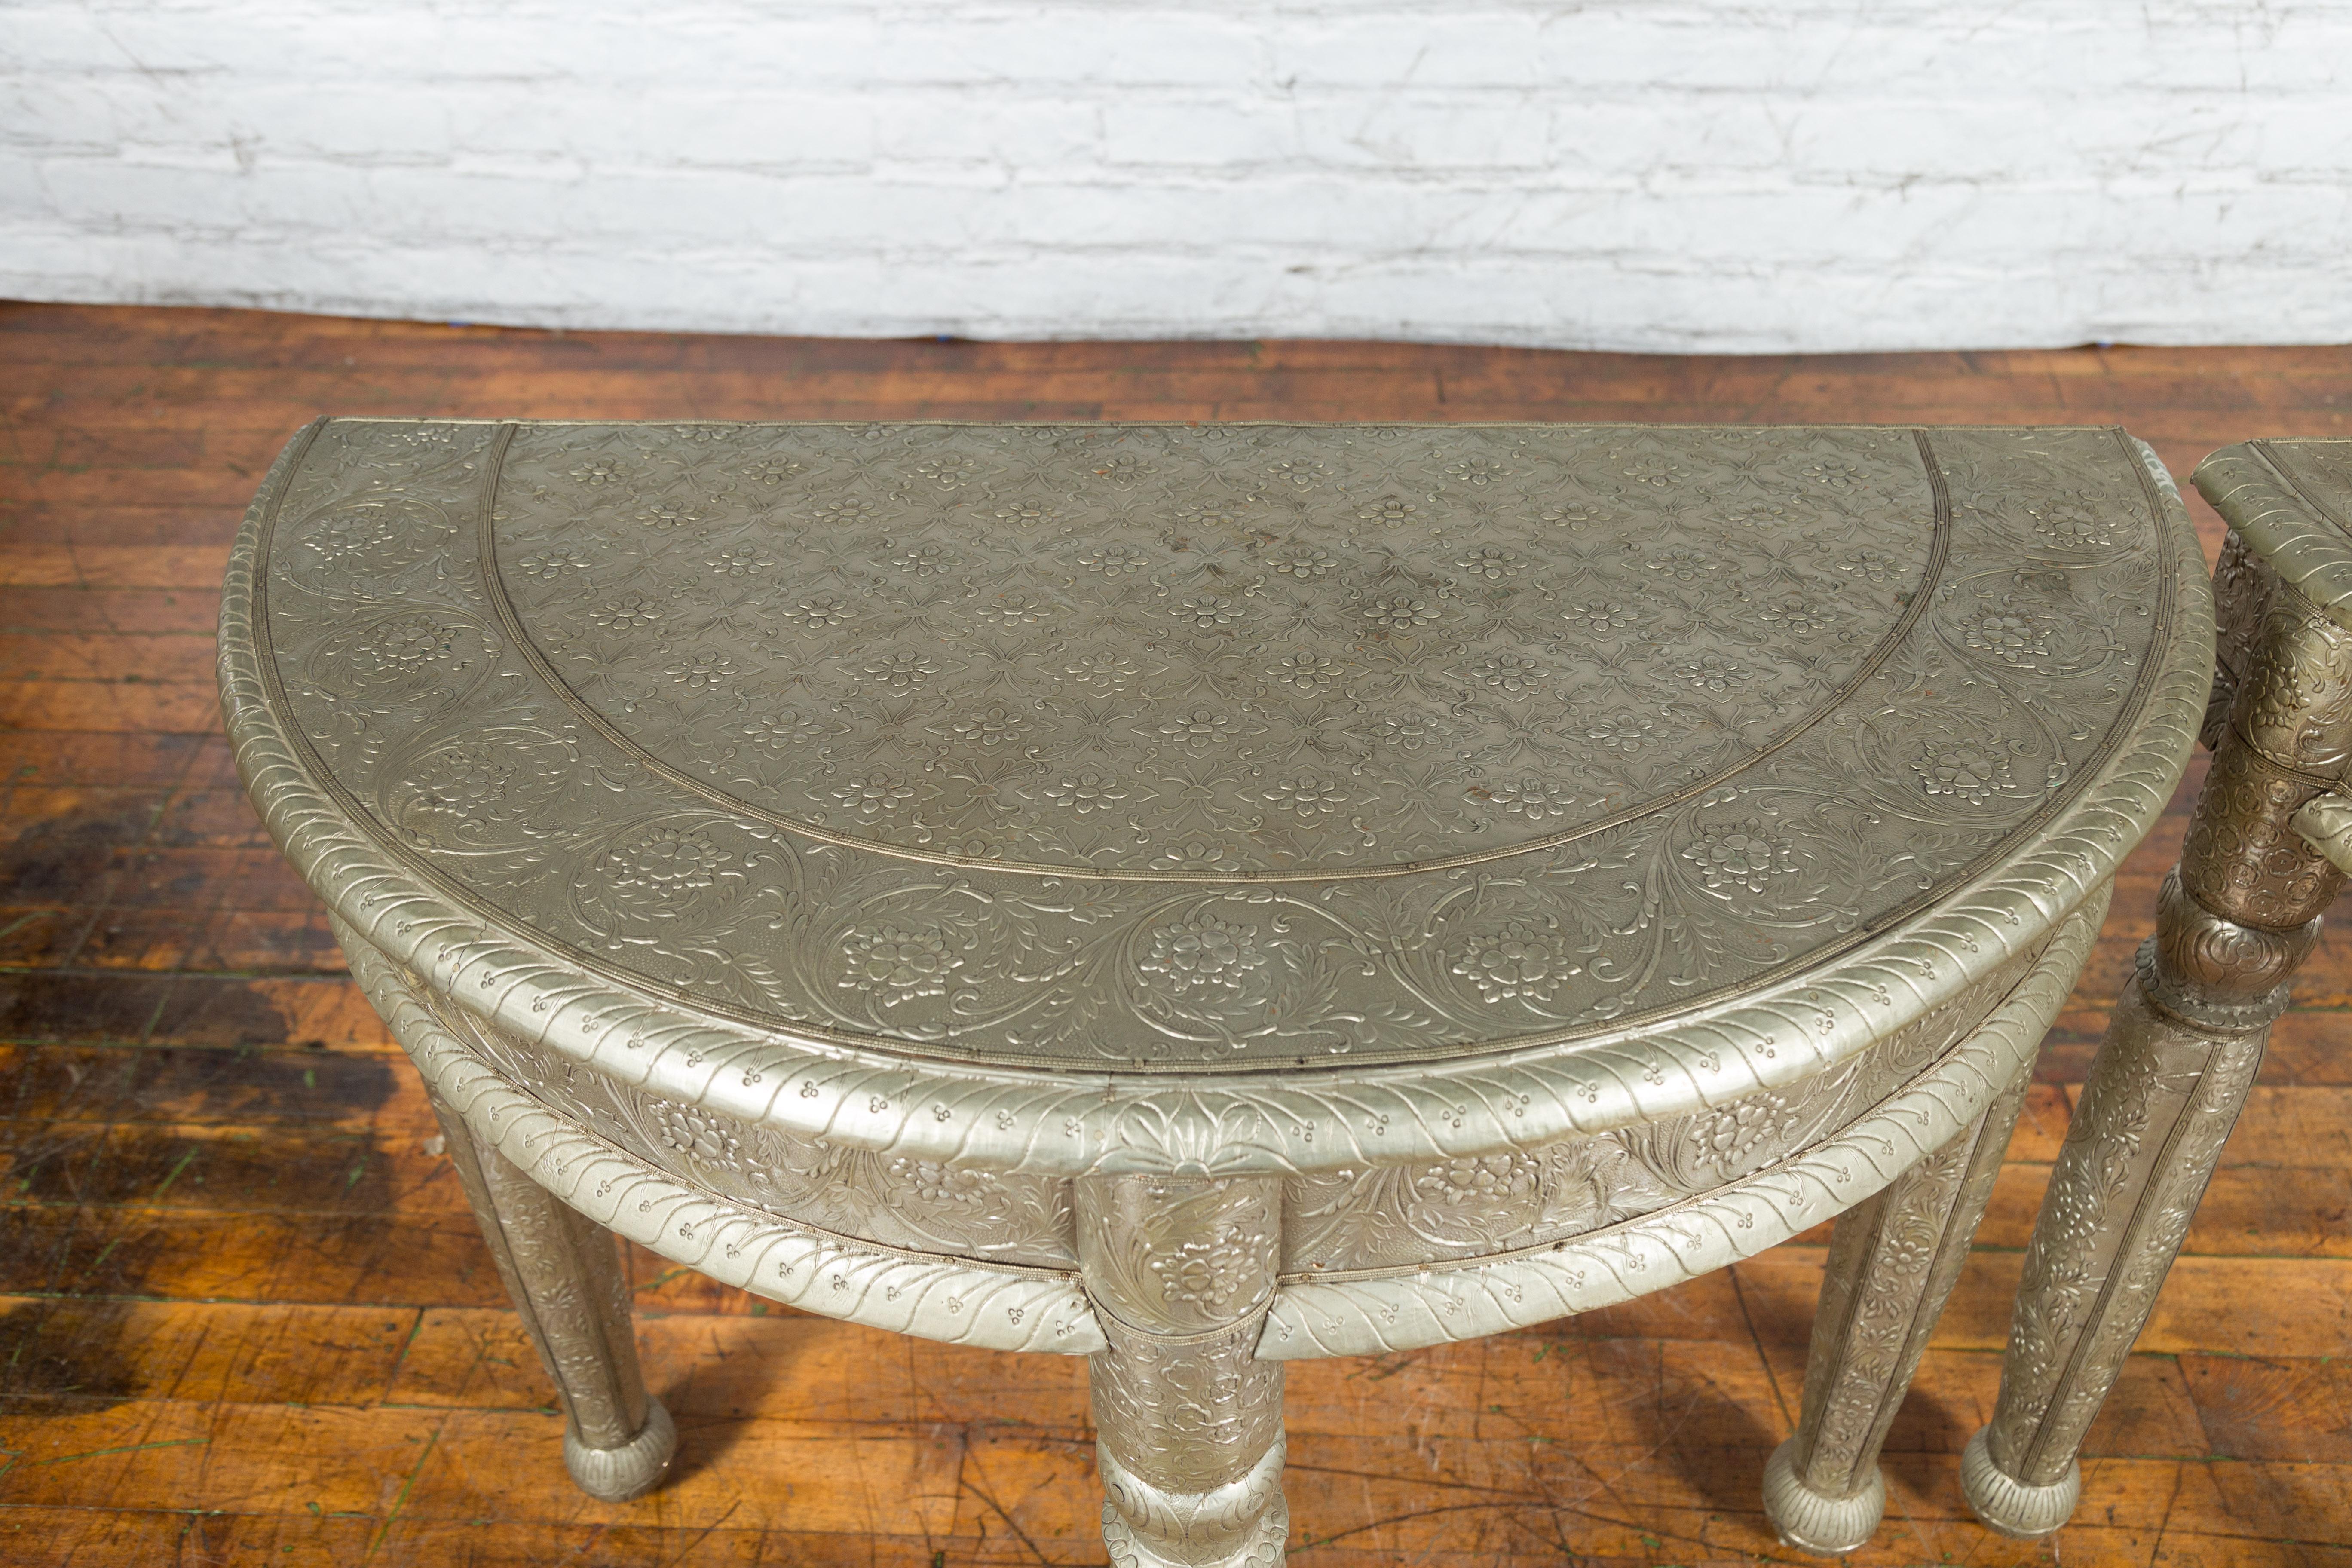 Pair of Indian Metal Sheathing Repoussé Demilune Tables with Floral Arabesques For Sale 3